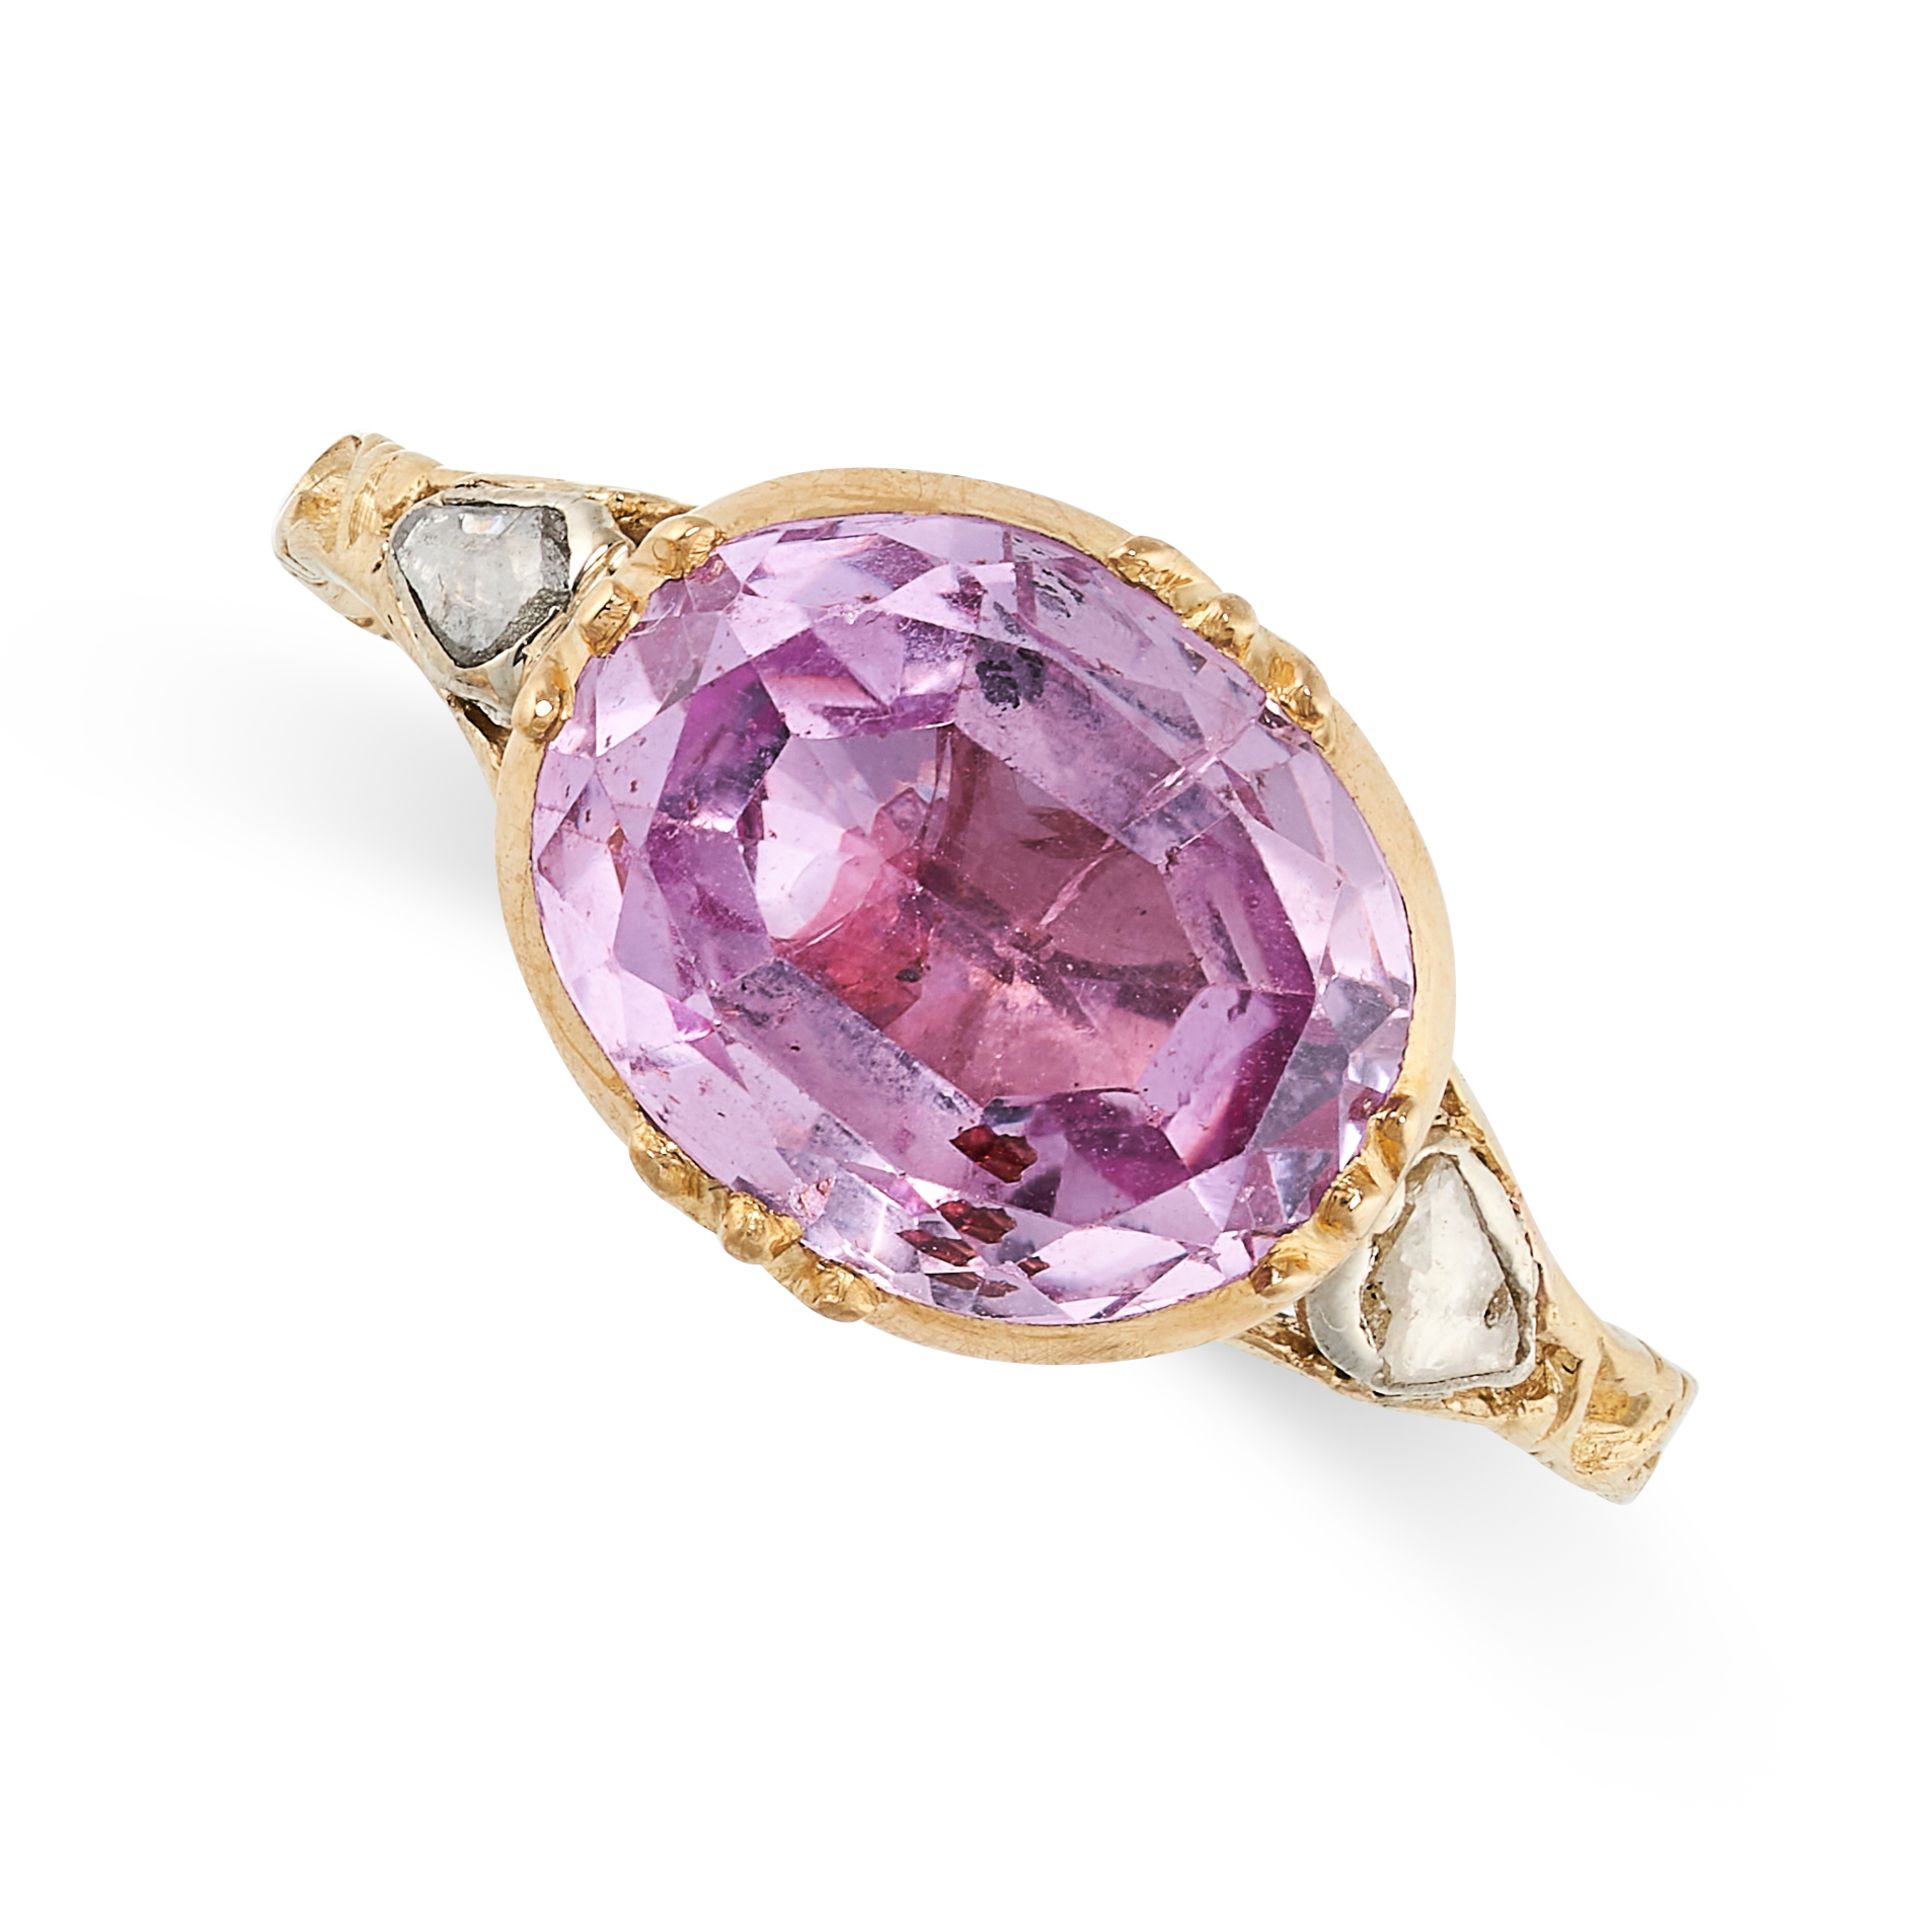 A PINK TOPAZ AND DIAMOND RING, 19TH CENTURY AND LATER in yellow gold, later converted to be a